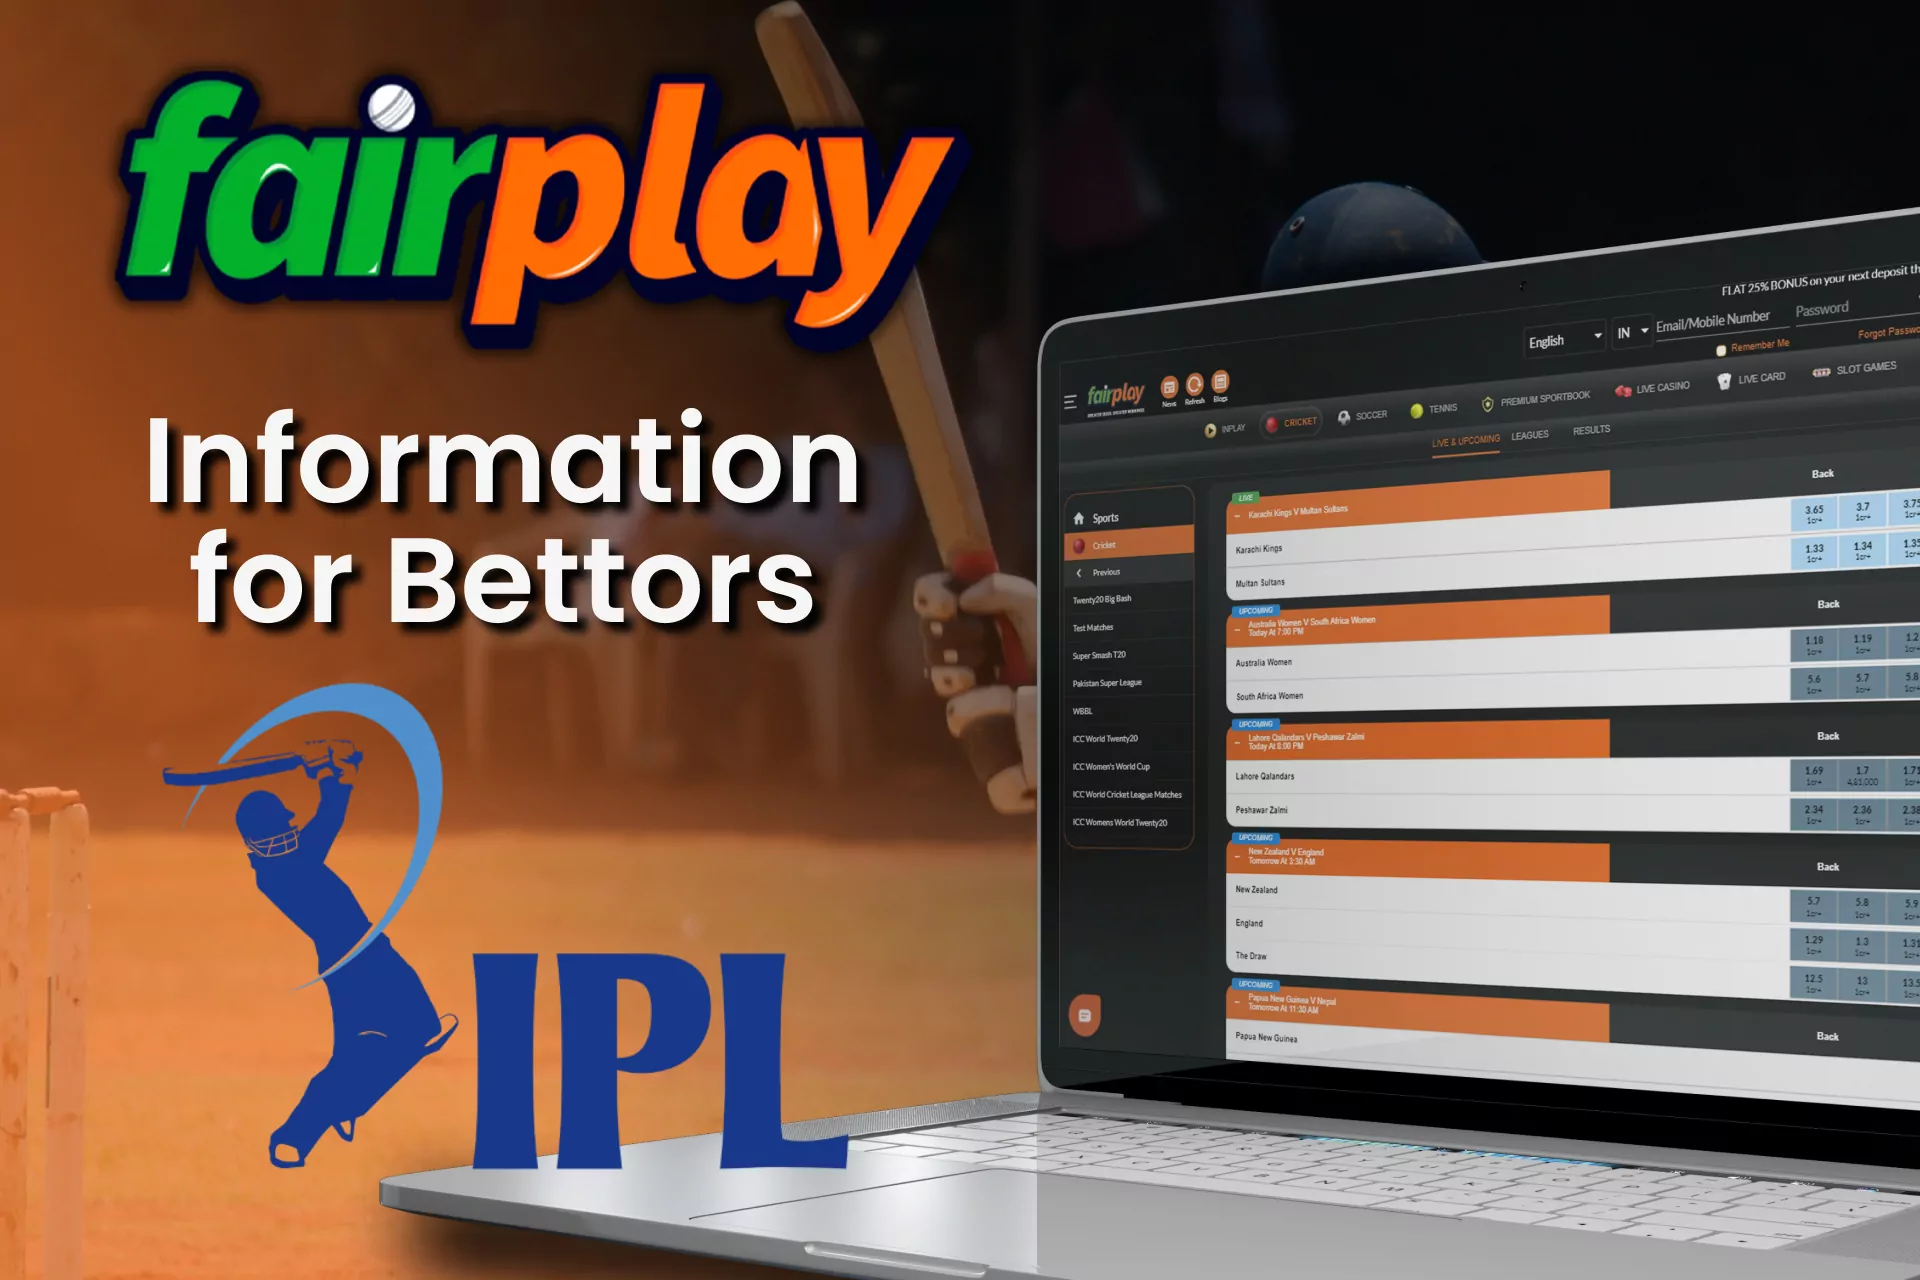 Find out about IPL at Fairplay.